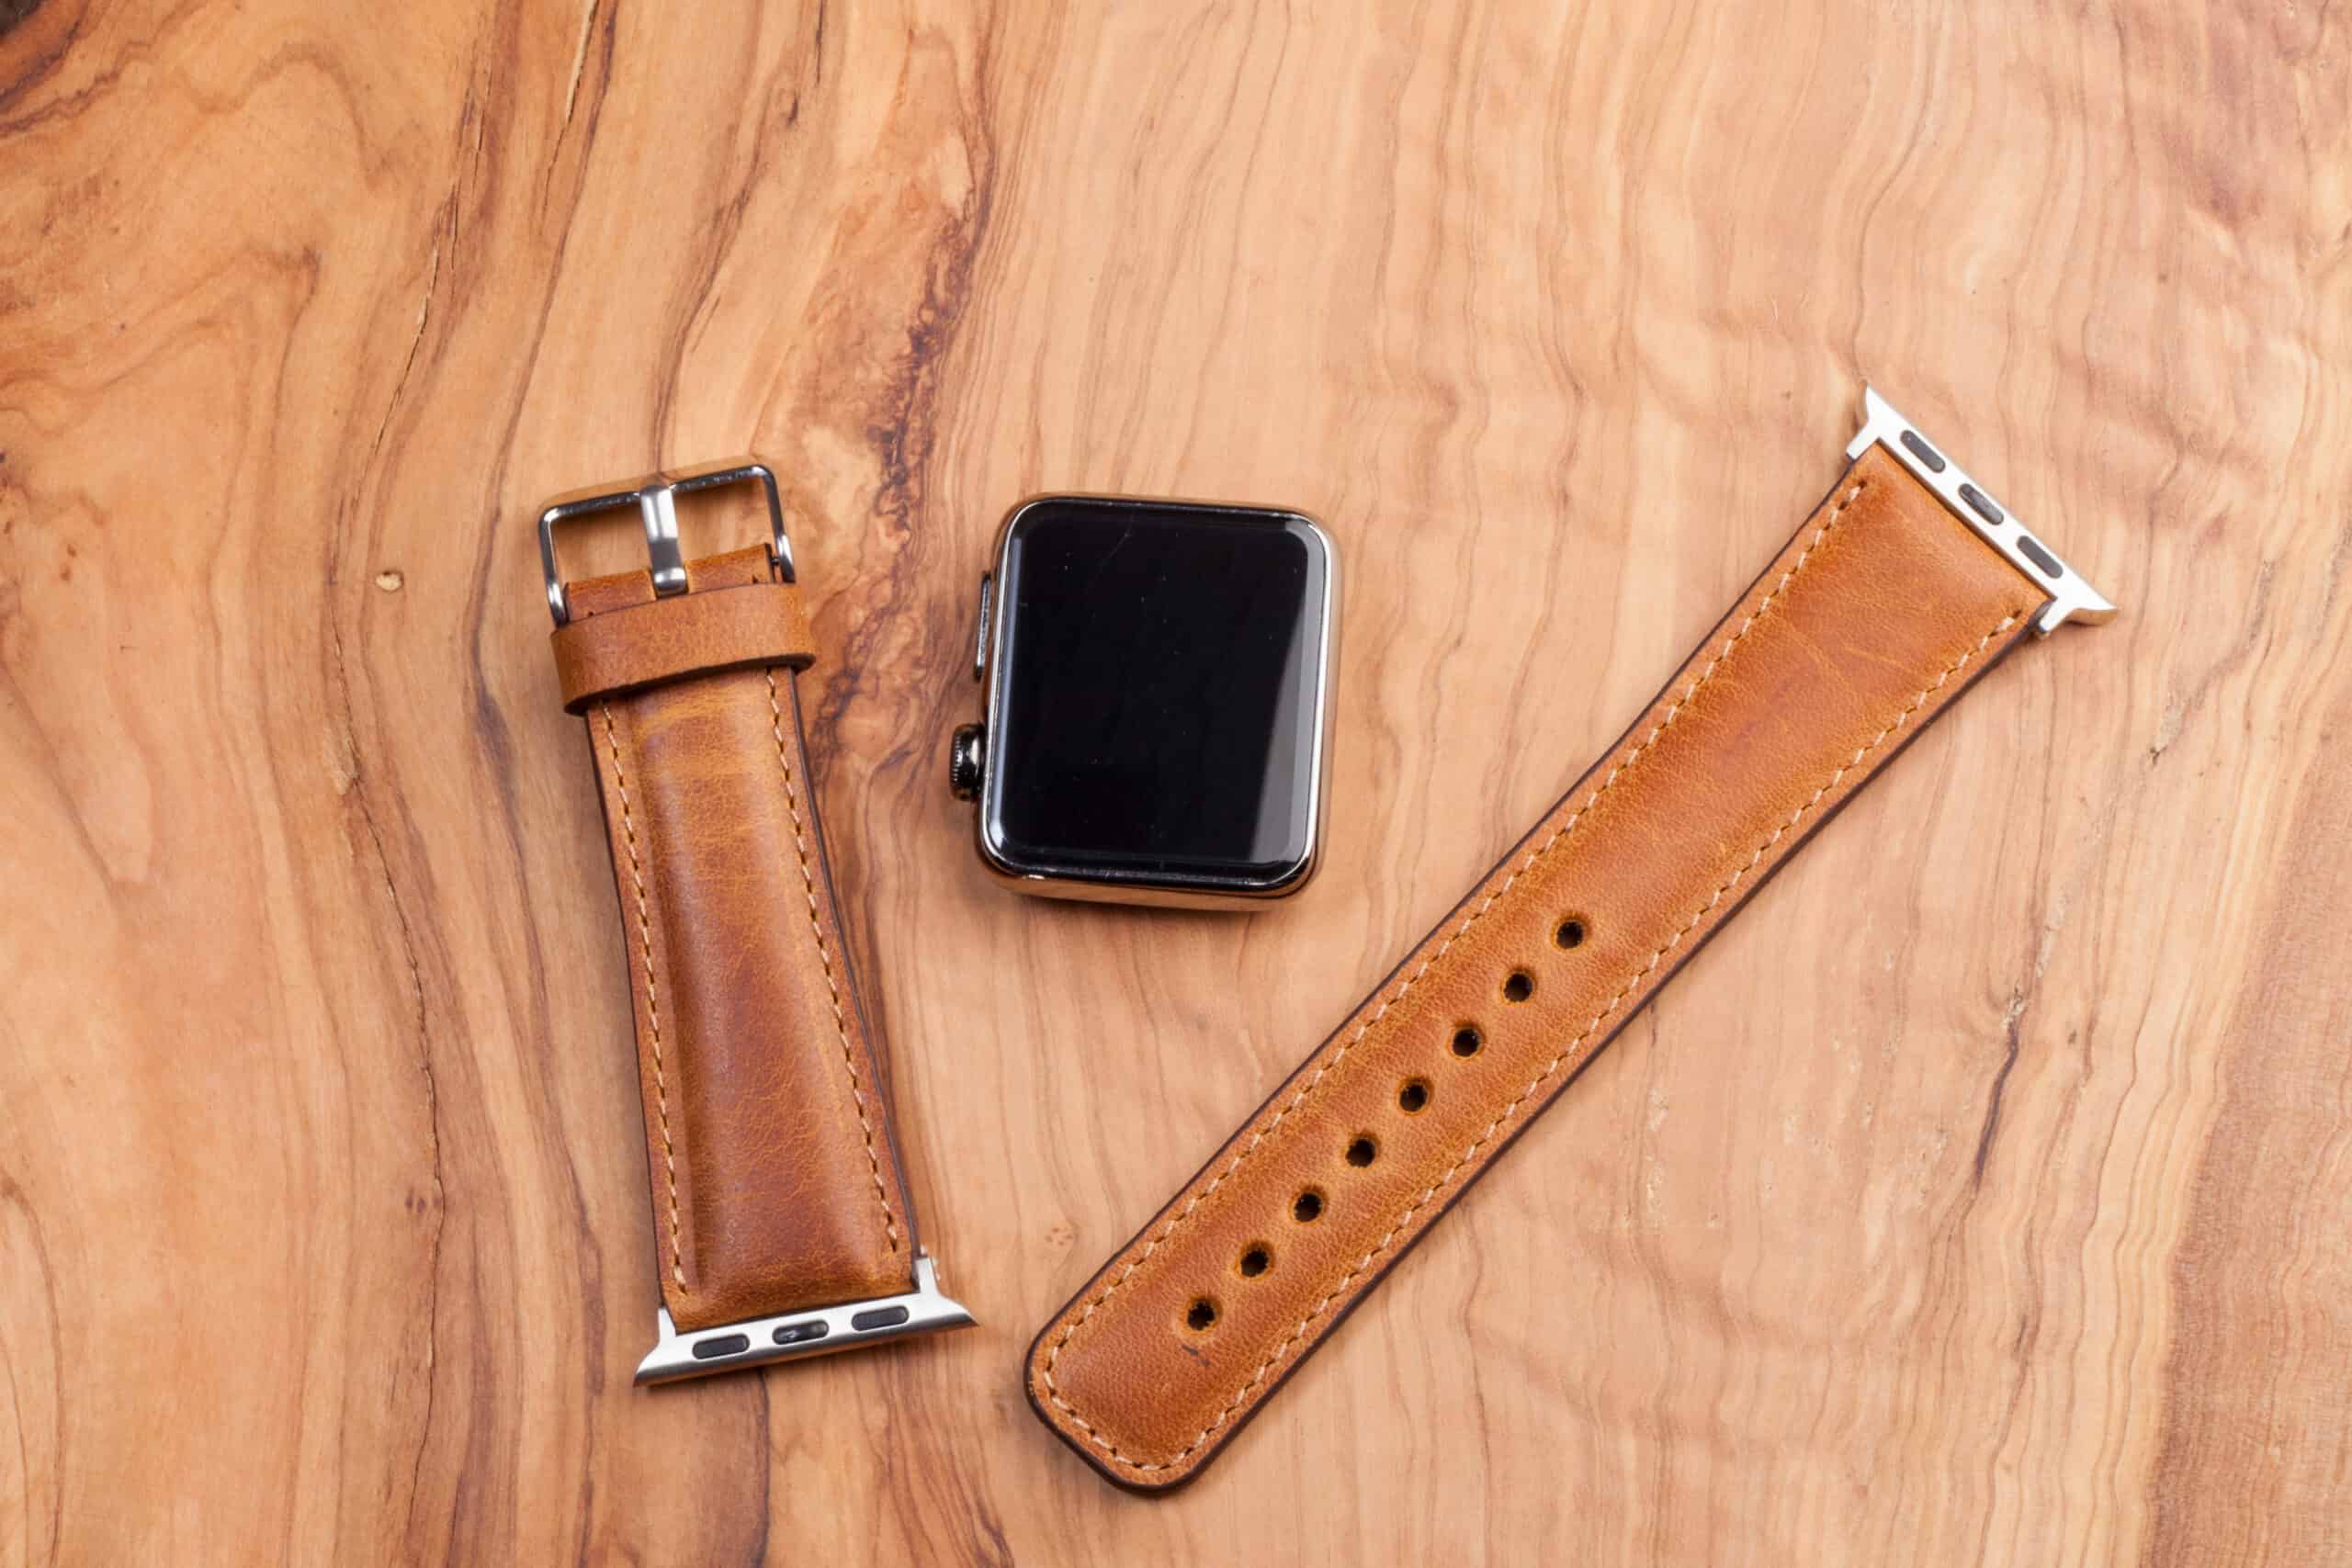 How Do You Change An Apple Watch Band?